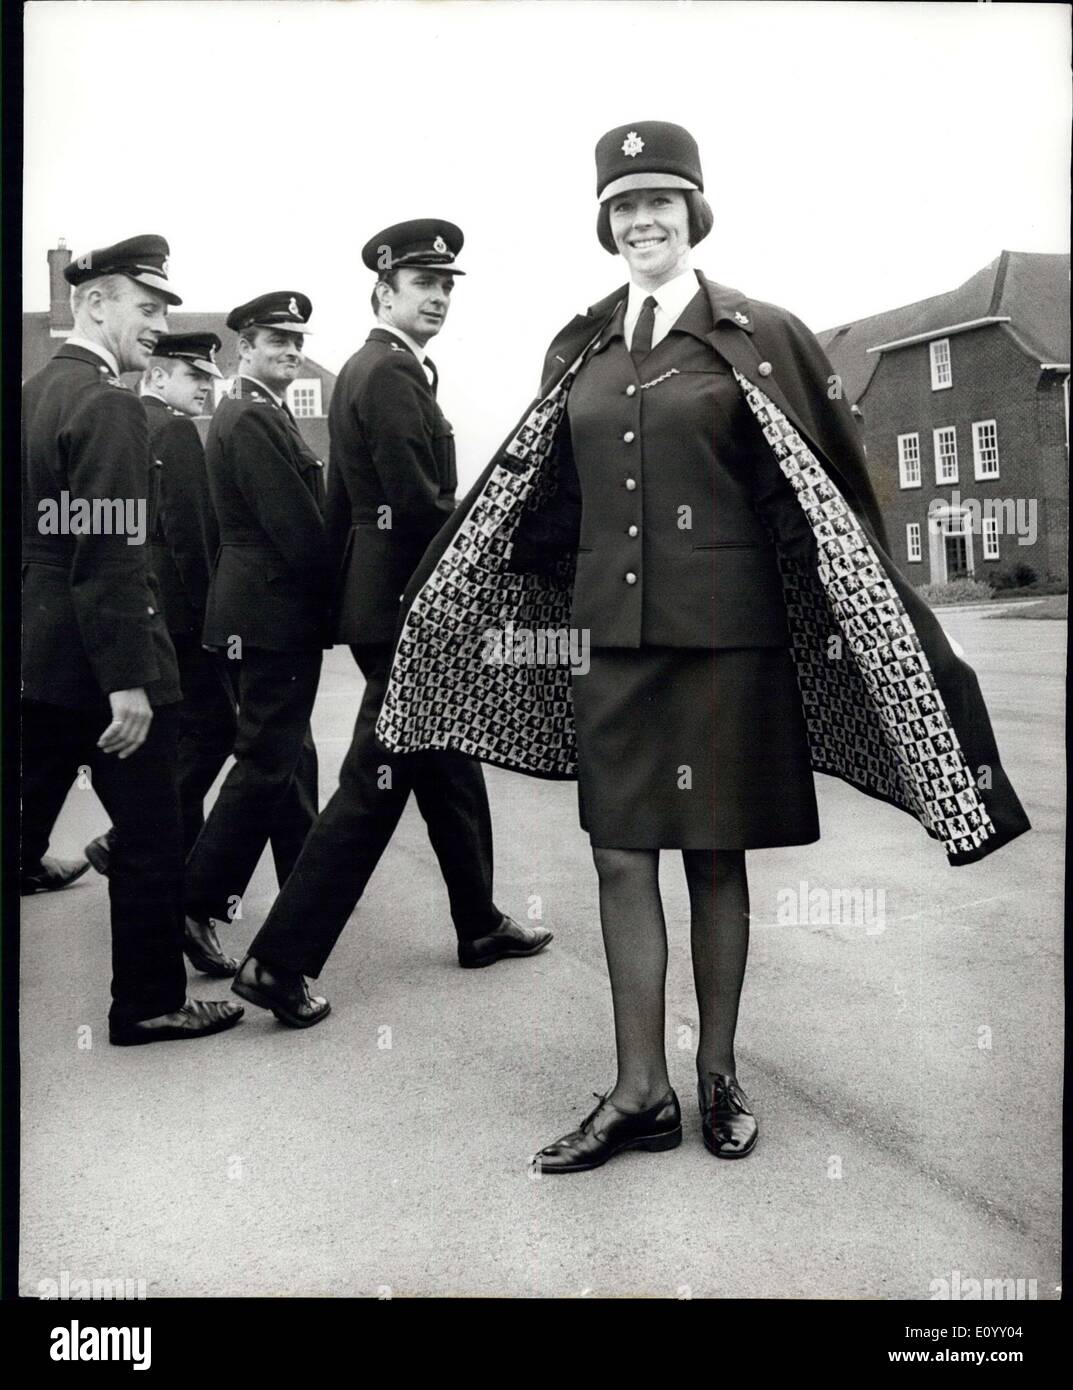 Oct. 11, 1971 - New Style Uniform For Kent Women Police: Women Officers and girl cadets in the Kent police Force will have a new style uniform from next April when the present uniform, adopted in 1961, will be phased out. The new new uniform will be issued to recruits and girl cadets on enrollment but serving policeman will receive the new uniforms as their existing garments become unserviceable. The new uniform is 55% terylene and 45% wool worsted, The uniform, which includes a full length cape, has been designed by Miss J. Moore, Head of the Art department of Thannet Technical College Stock Photo